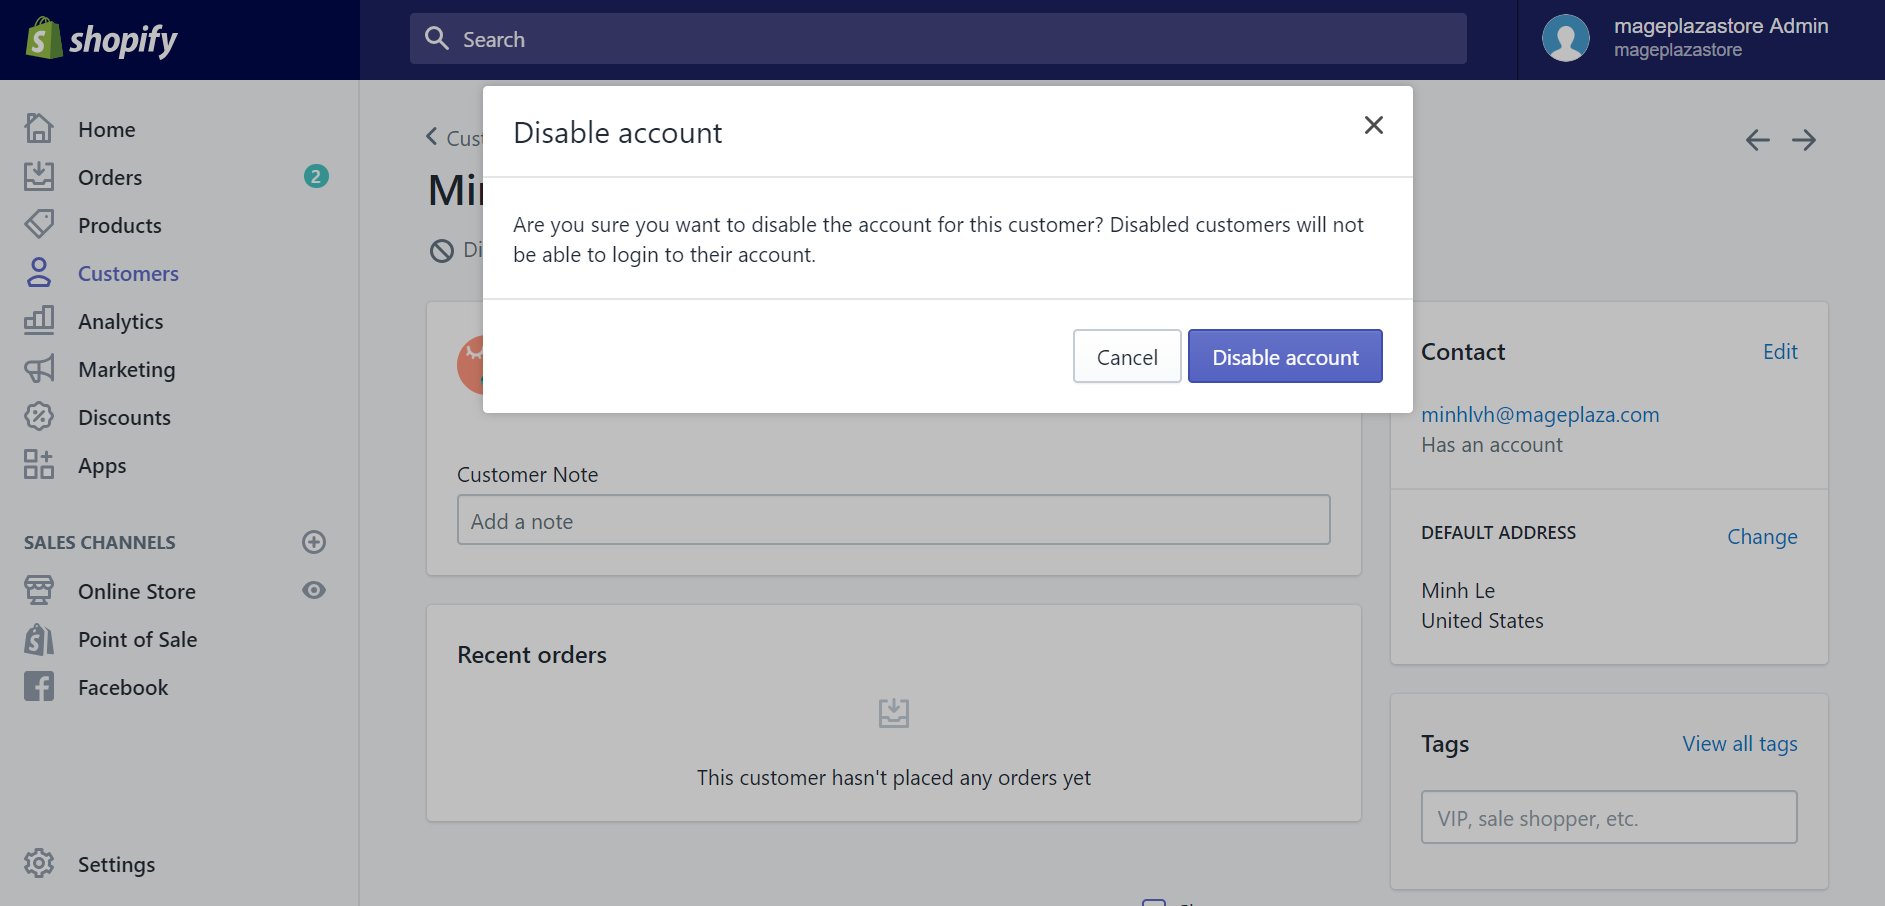 How to disable a customer's account